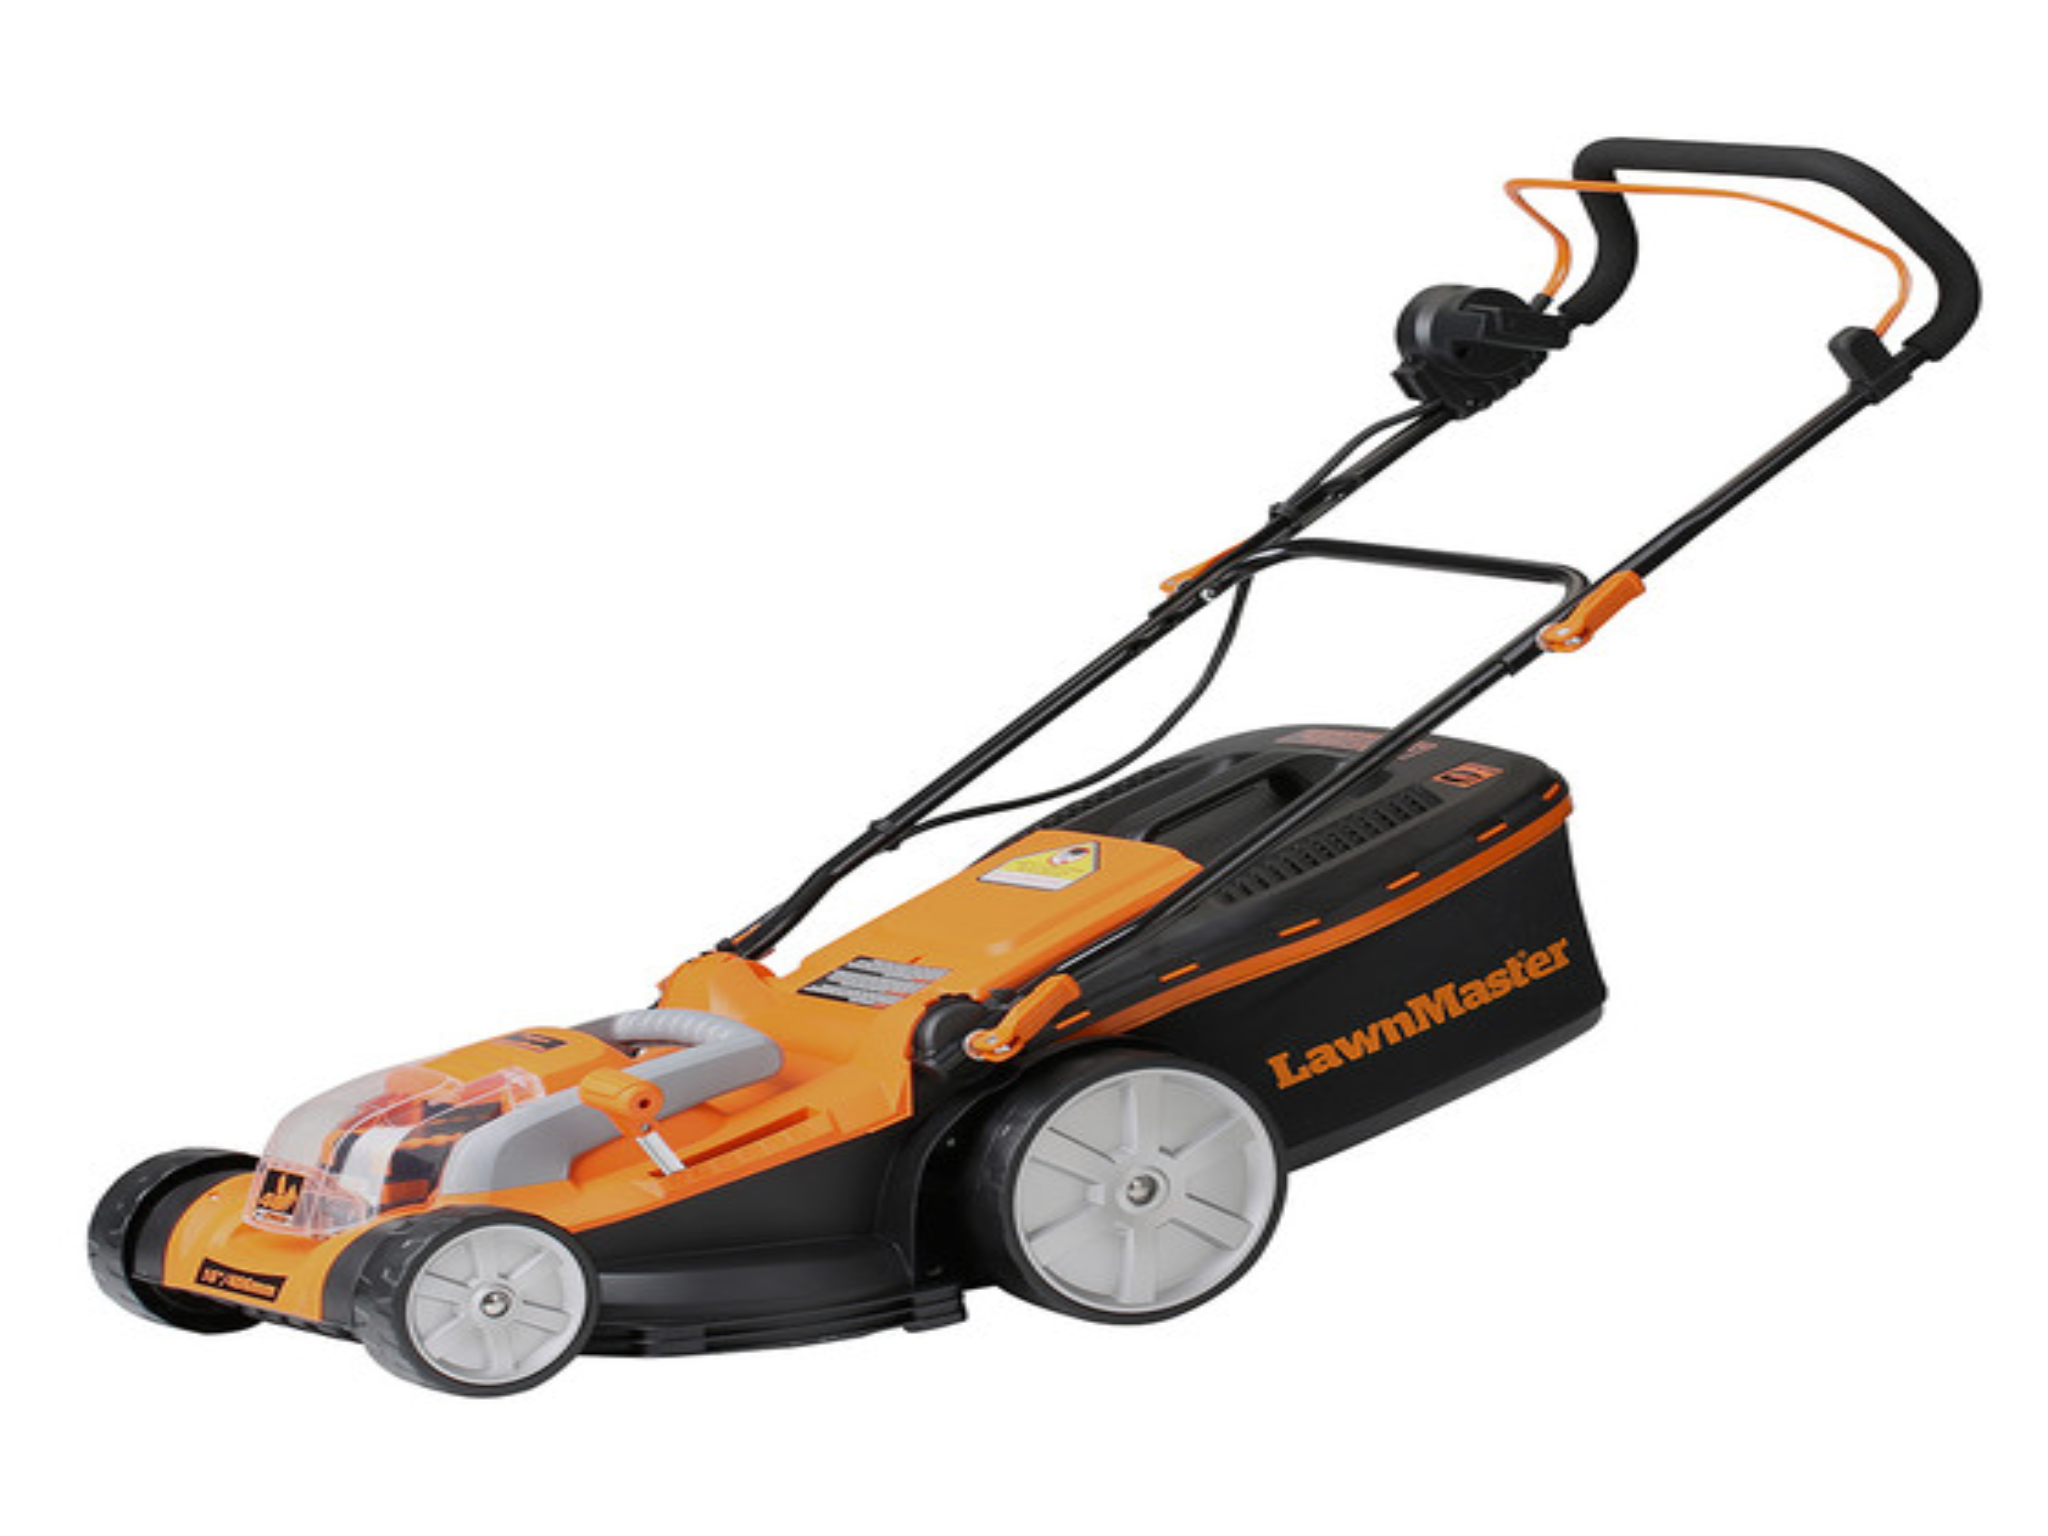 Lawnmaster-indybest-best-lawnmowers-review